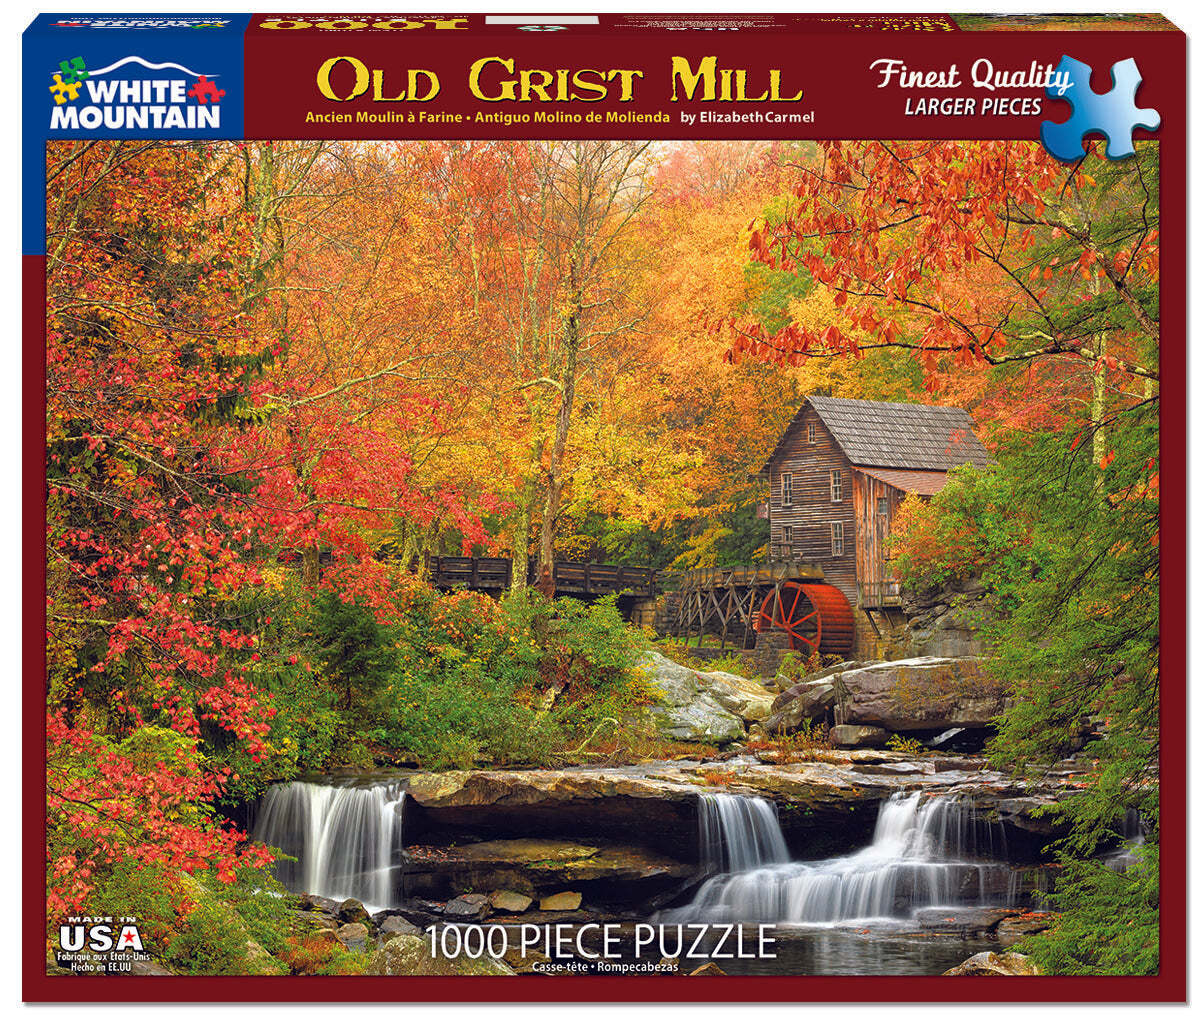 Old Grist Mill (1040pz) - 1000 Piece Jigsaw Puzzle